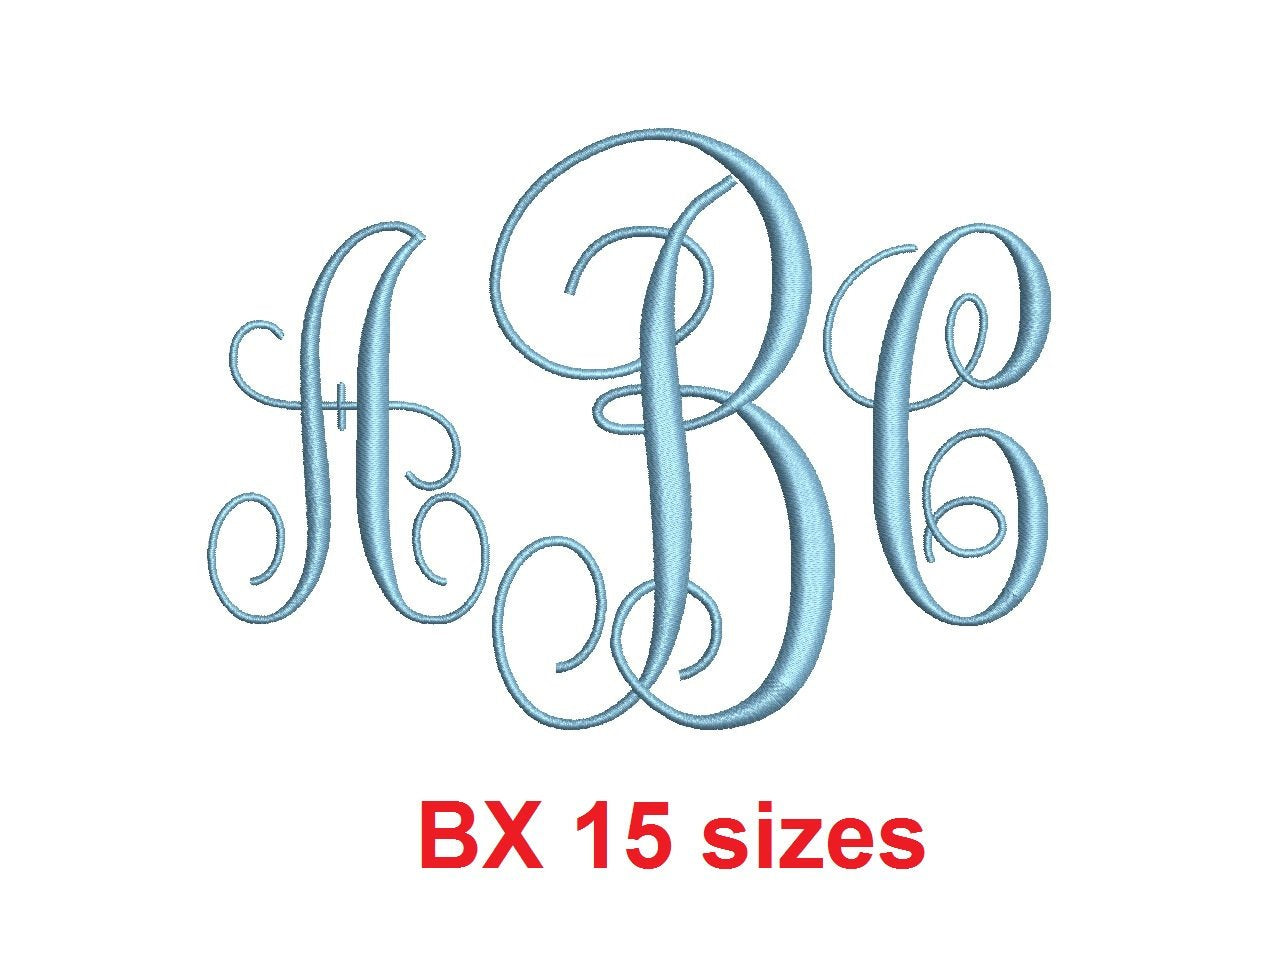 embroidery monogram fonts